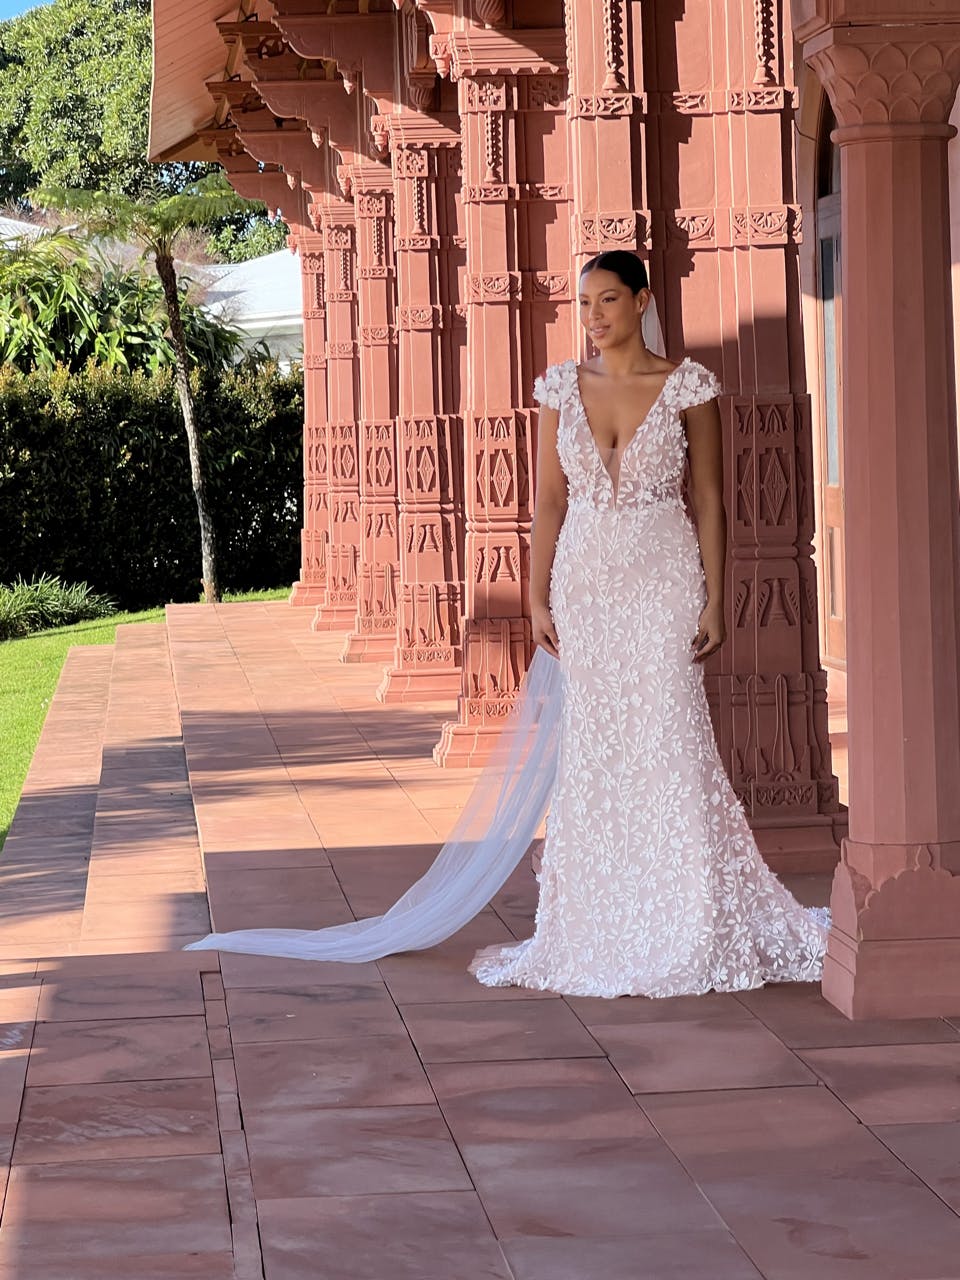 High fashion wedding shoot in main residence, one of the most unique buildings in the country